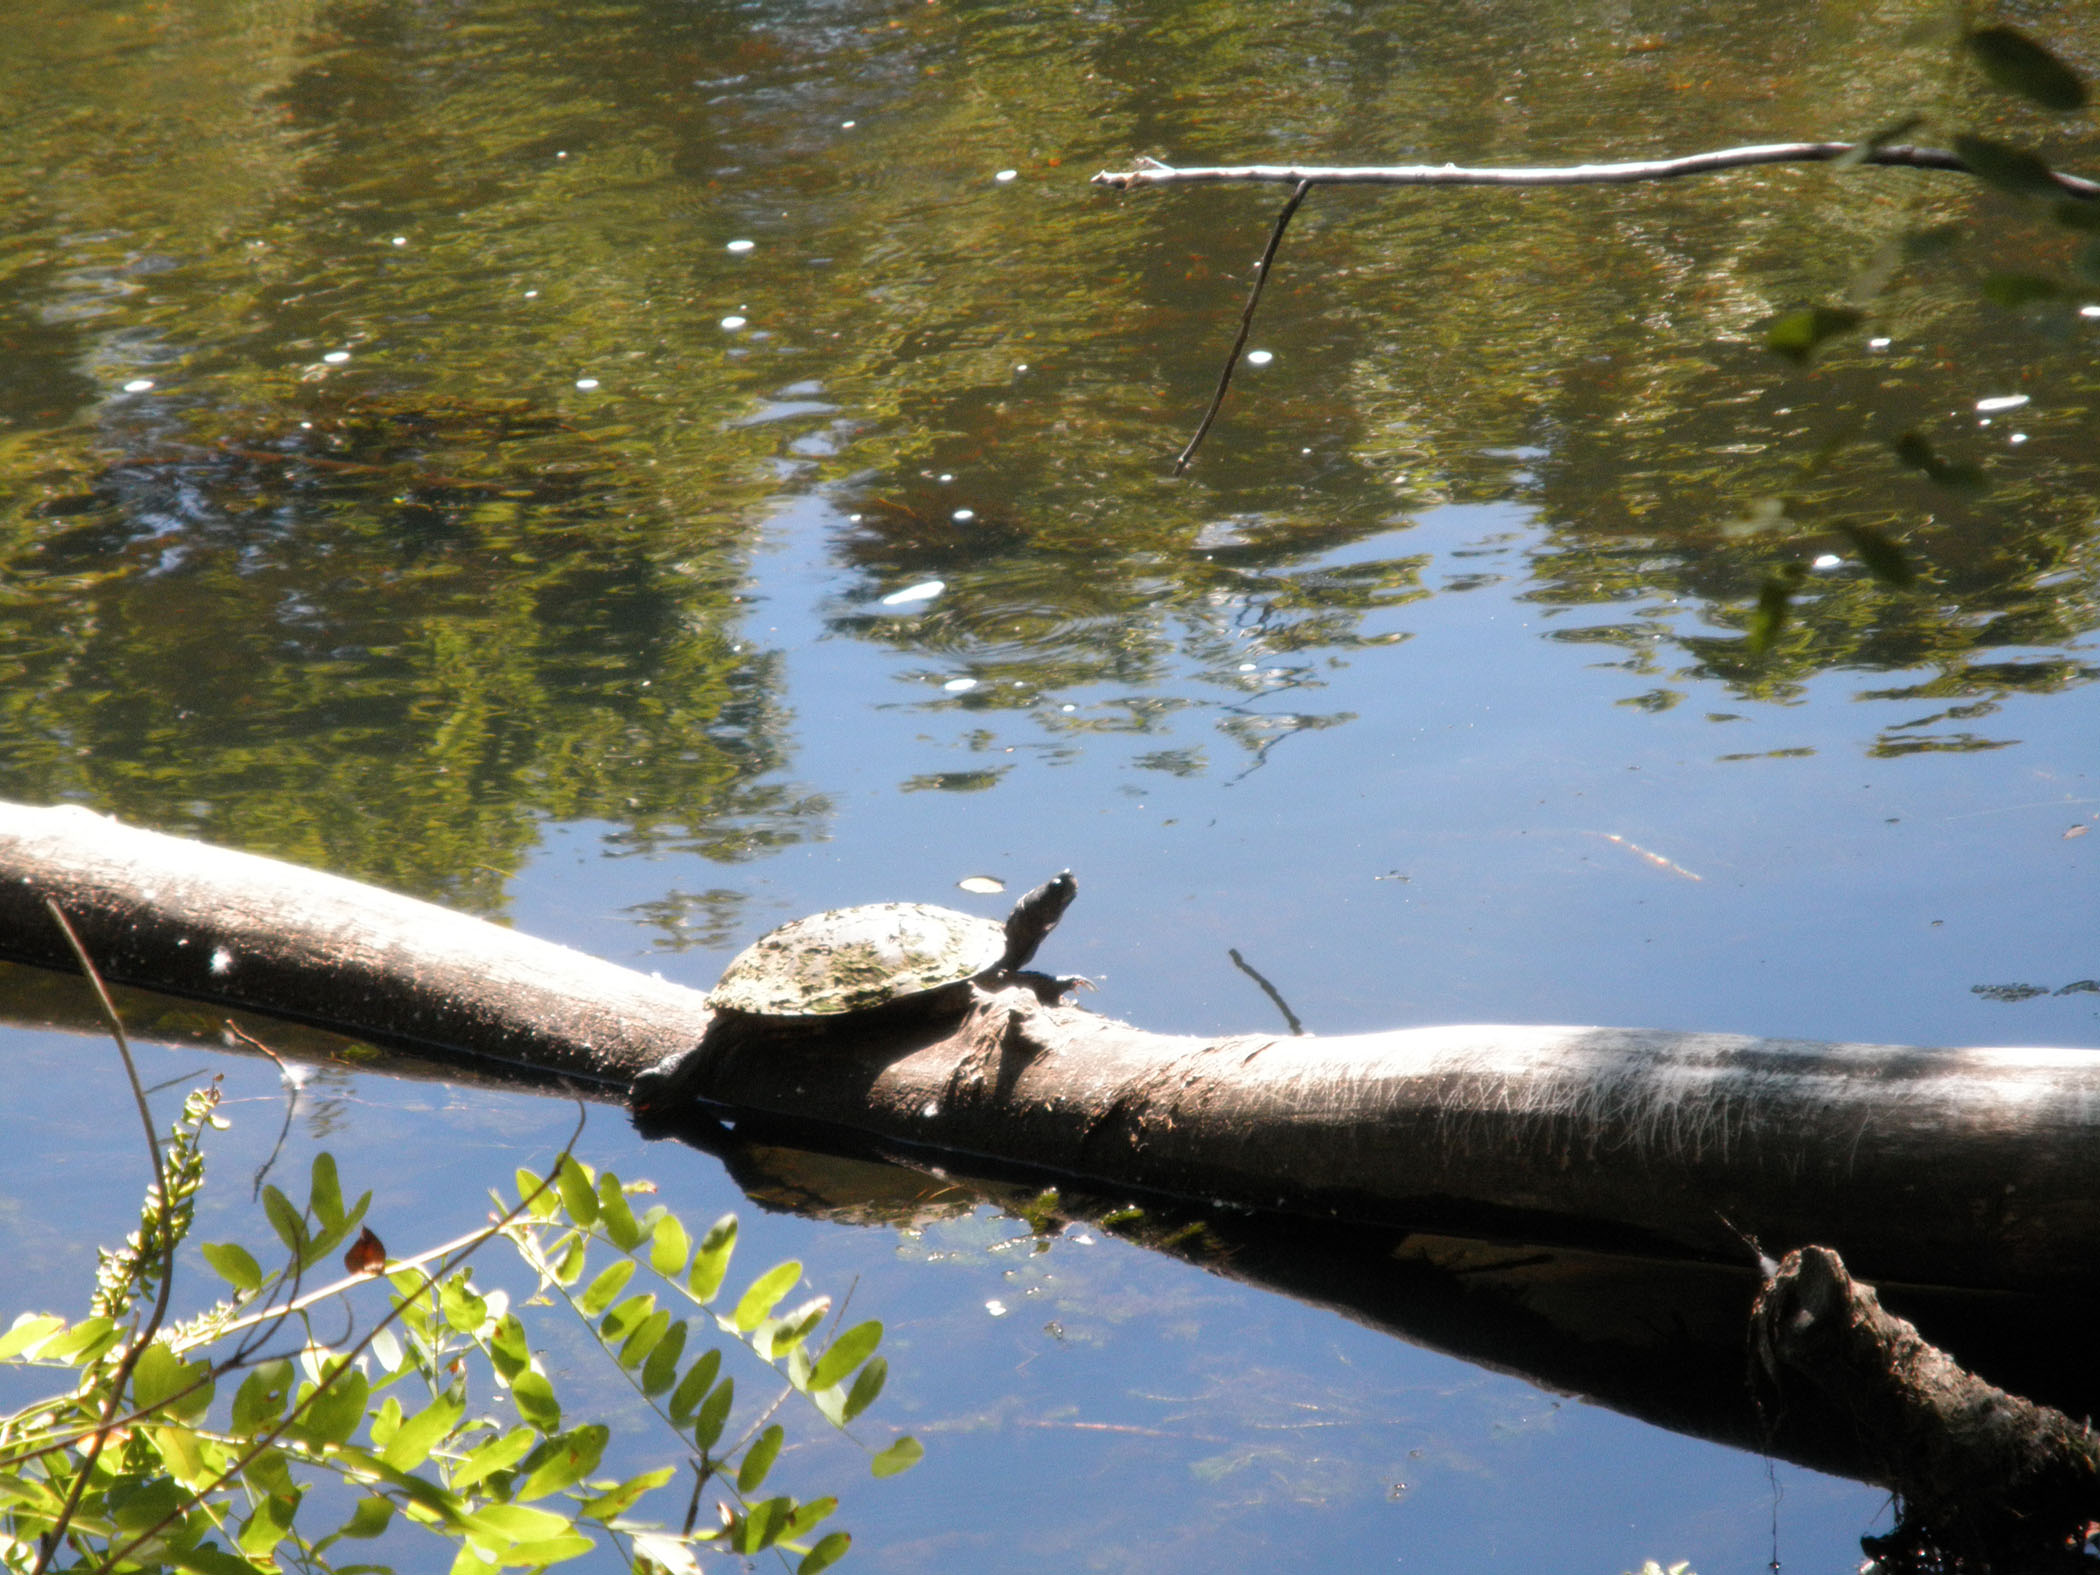 Sunning Turtle On Log (user submitted)